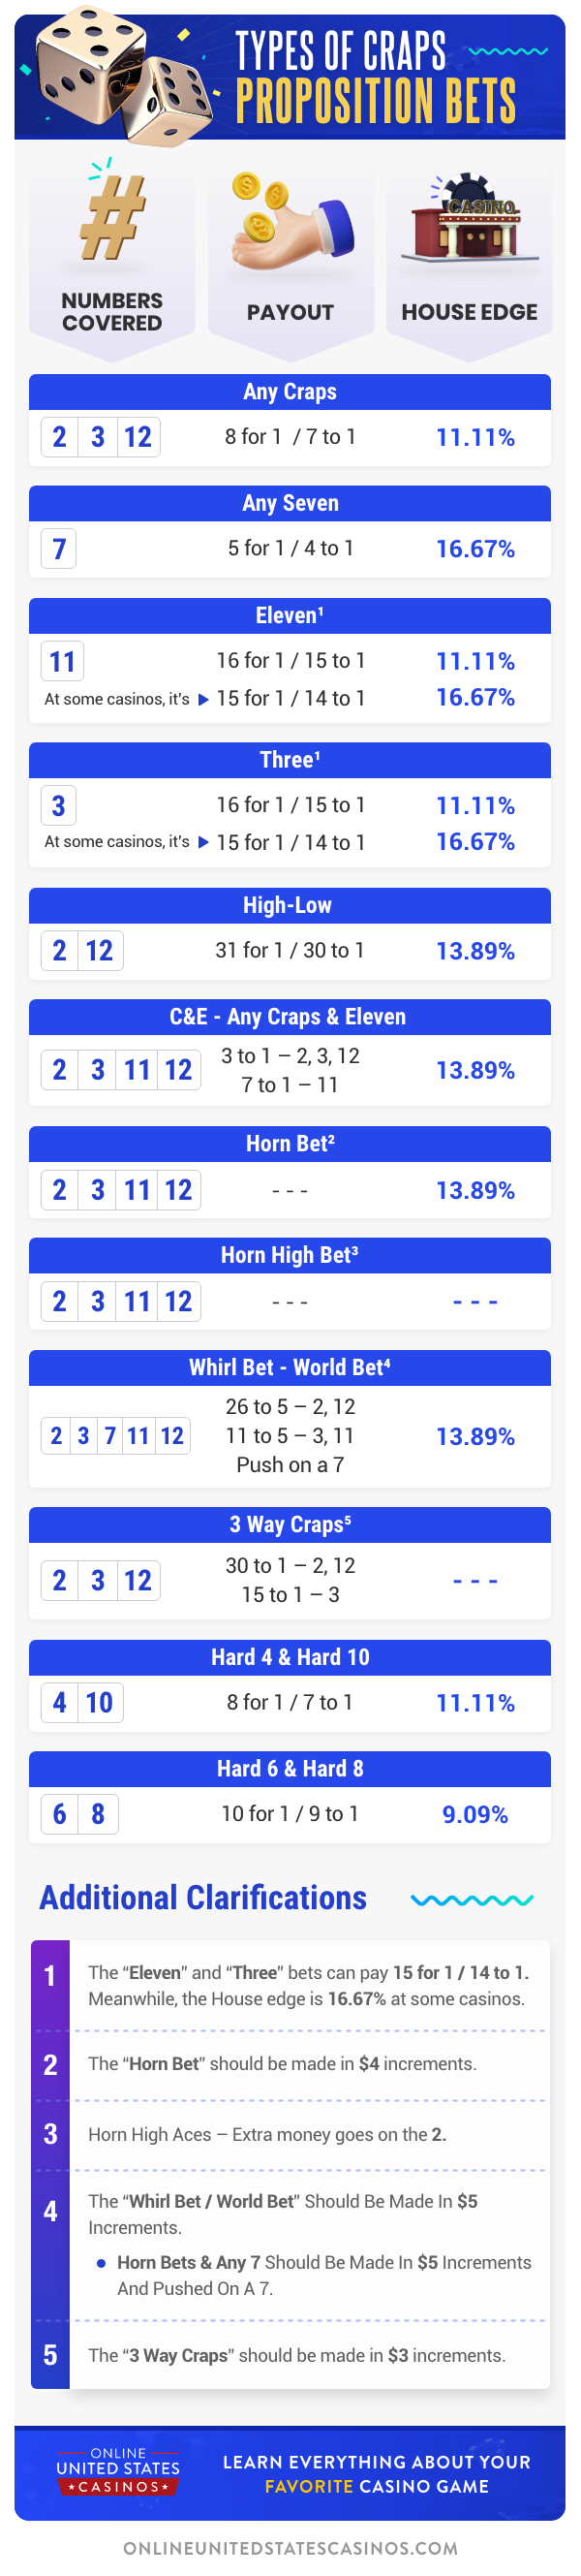 Types of Craps Proposition Bets - Mobile version